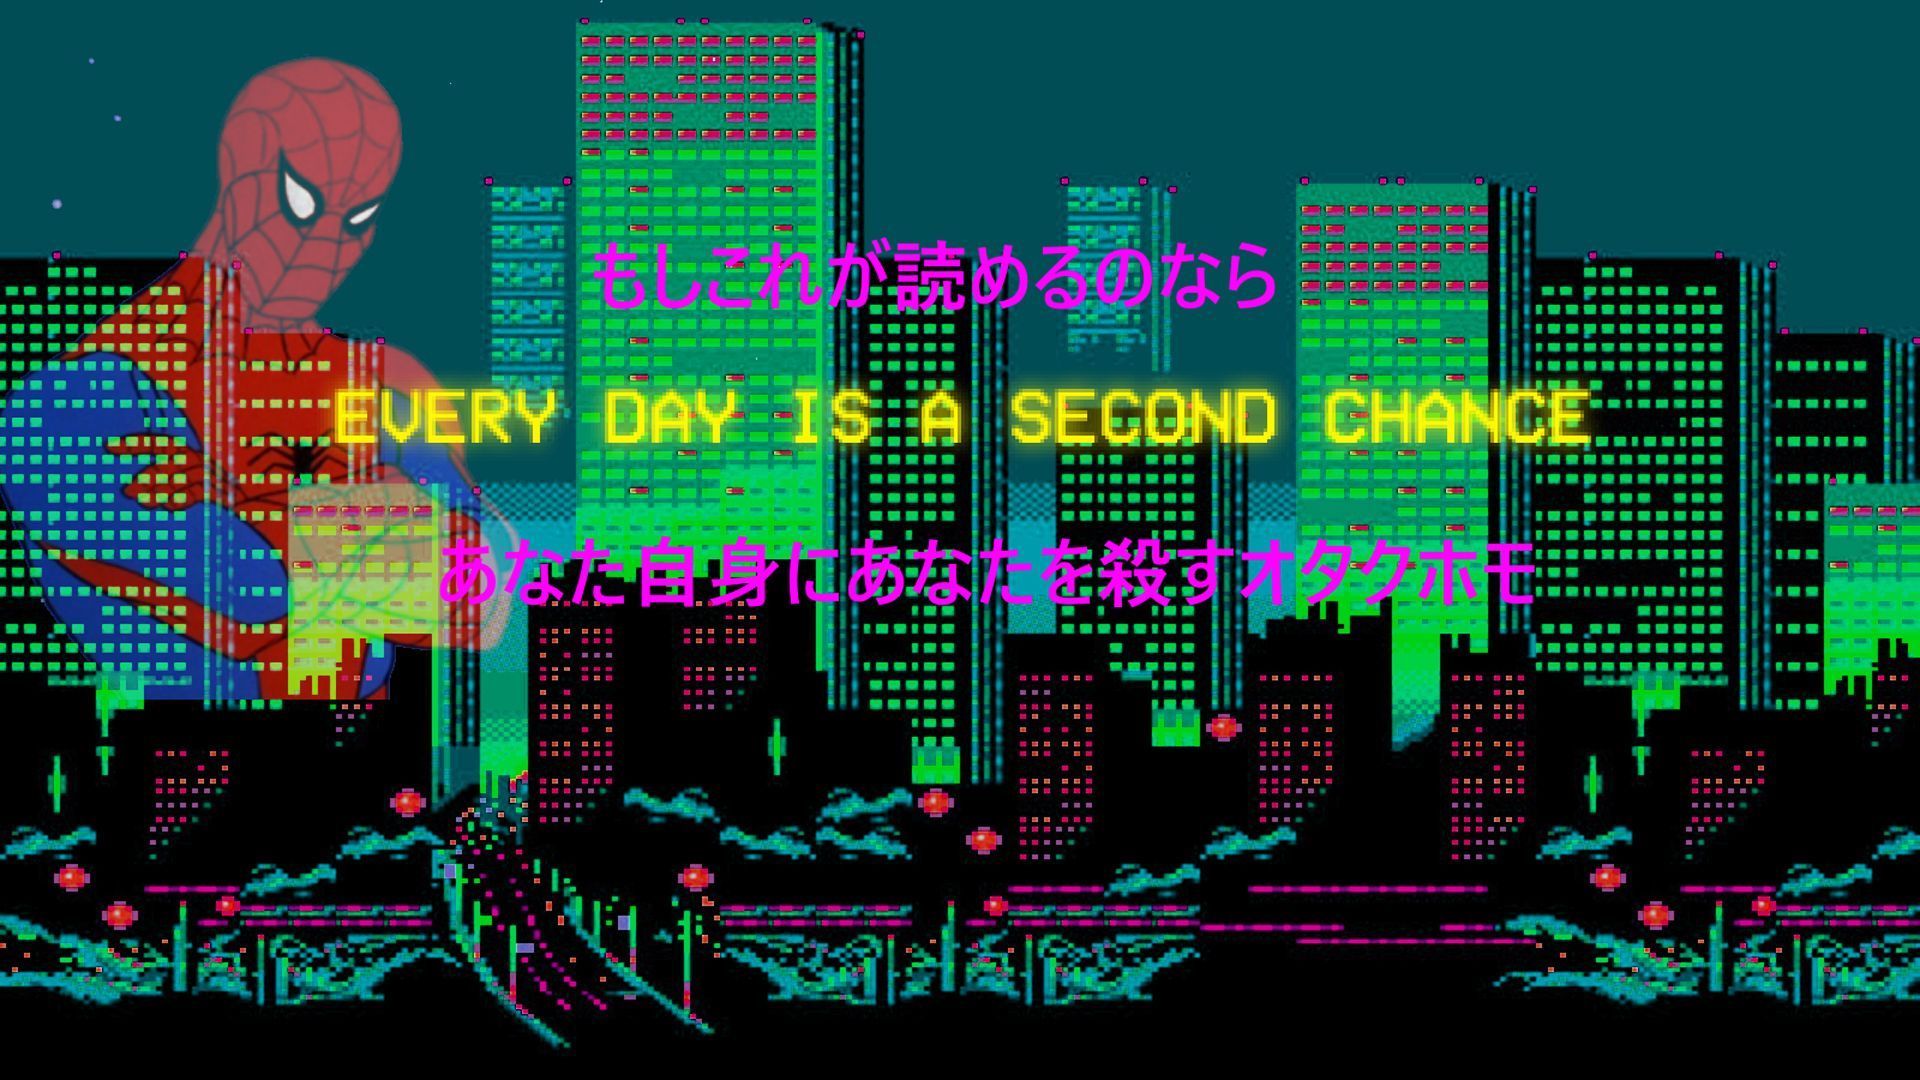  HD 1920x1080 Hintergrundbild 1920x1080. Everyday is a Second Chance Aesthetic Wallpaper, HD Artist 4K Wallpaper, Image and Background